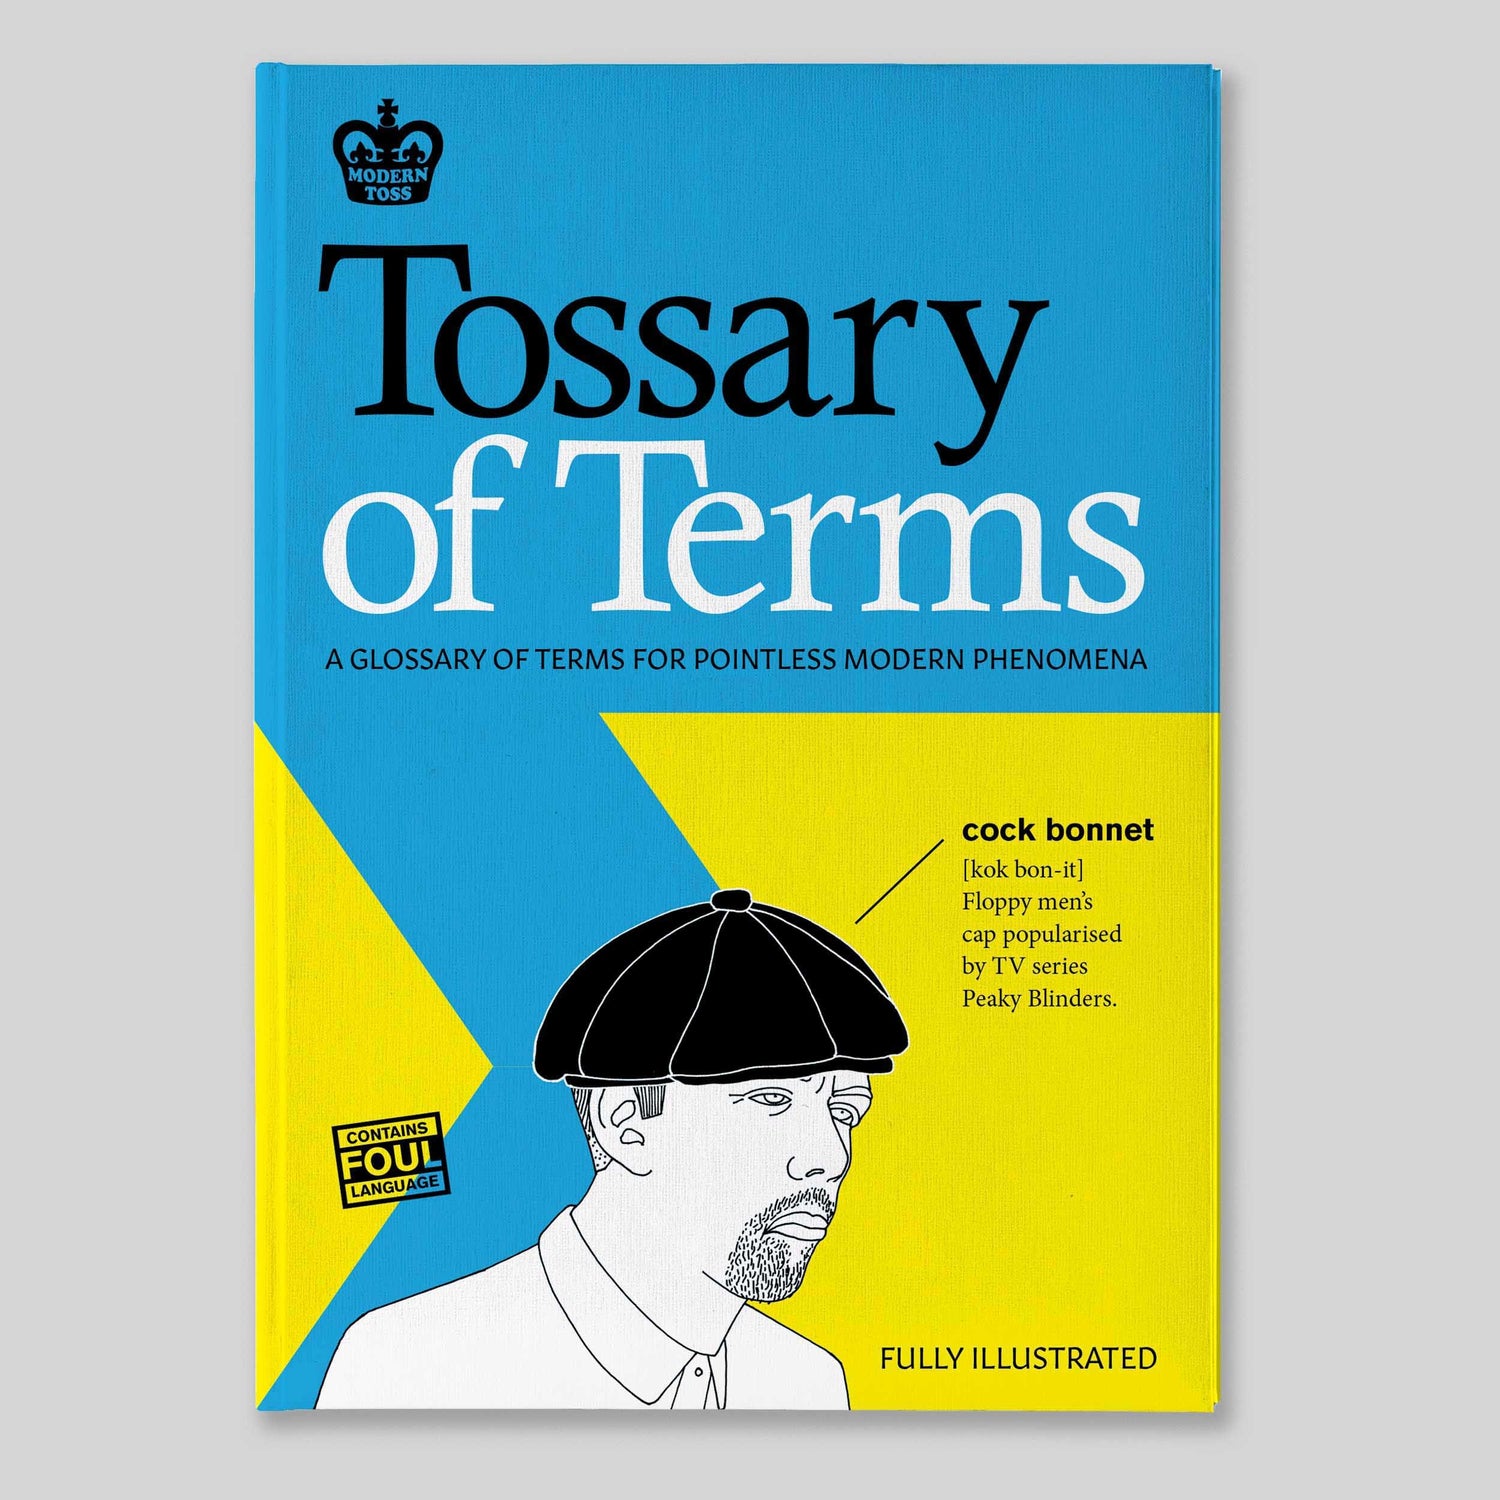 Tossary of Terms